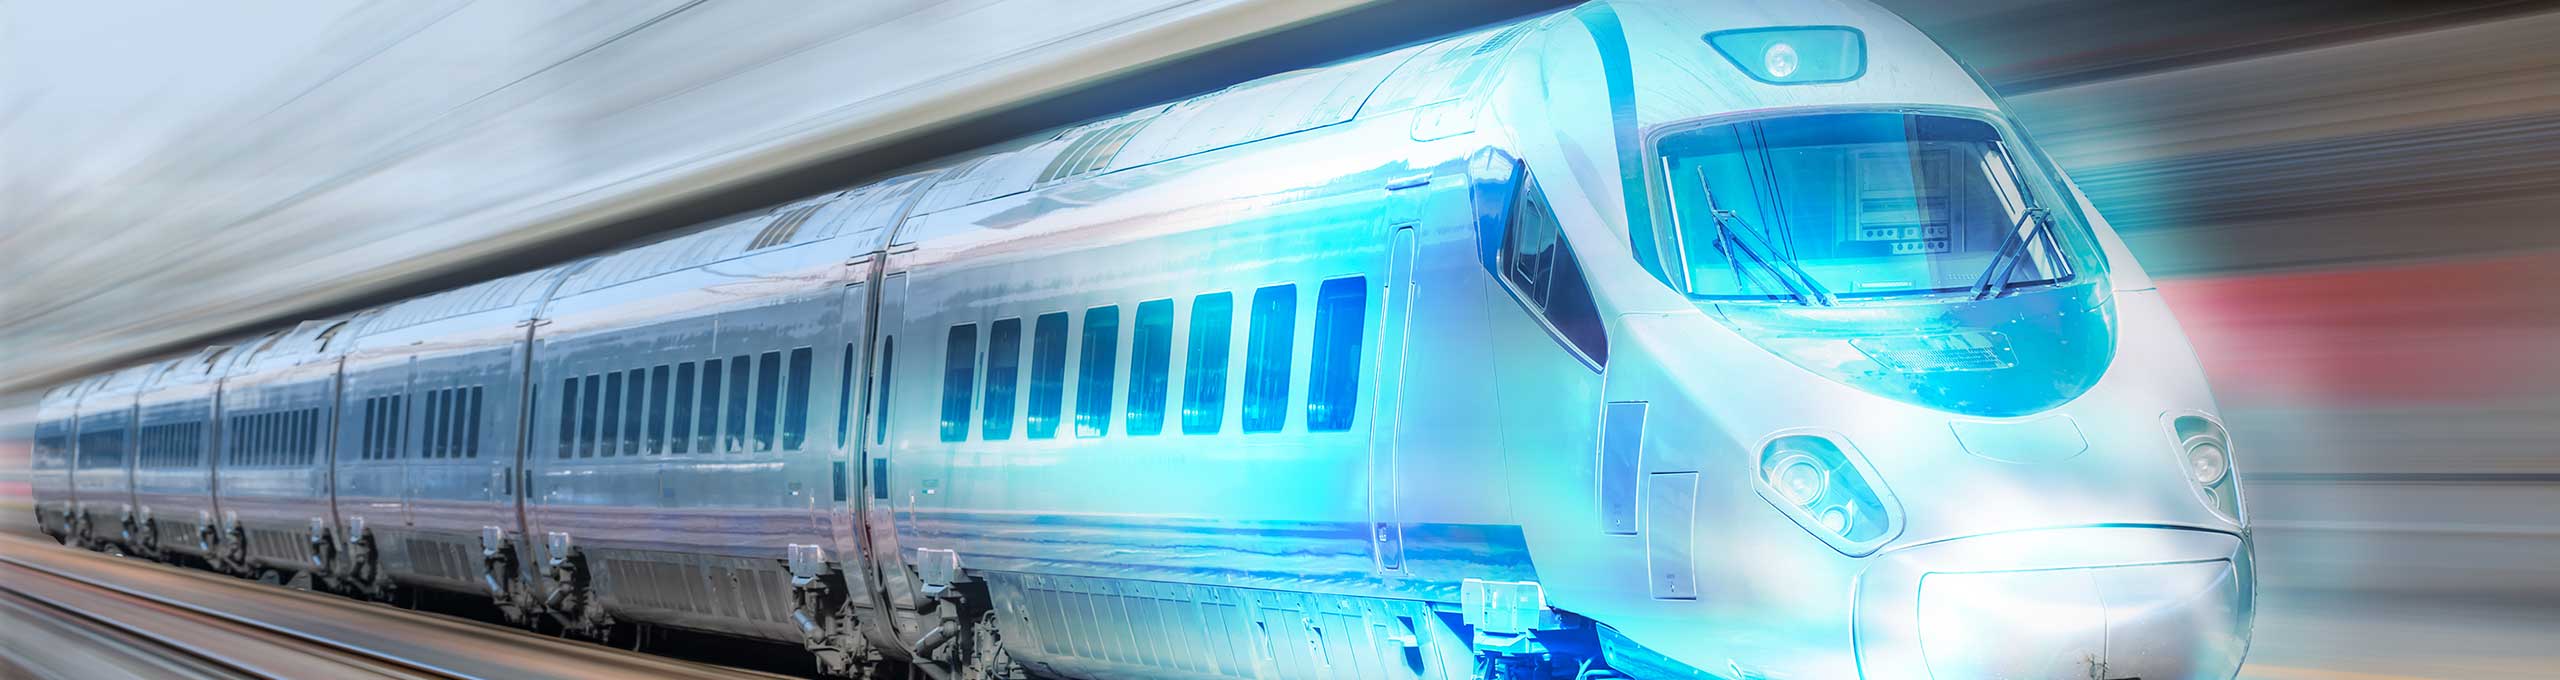 Stylized image of a bullet train, speeding down the tracks toward the future